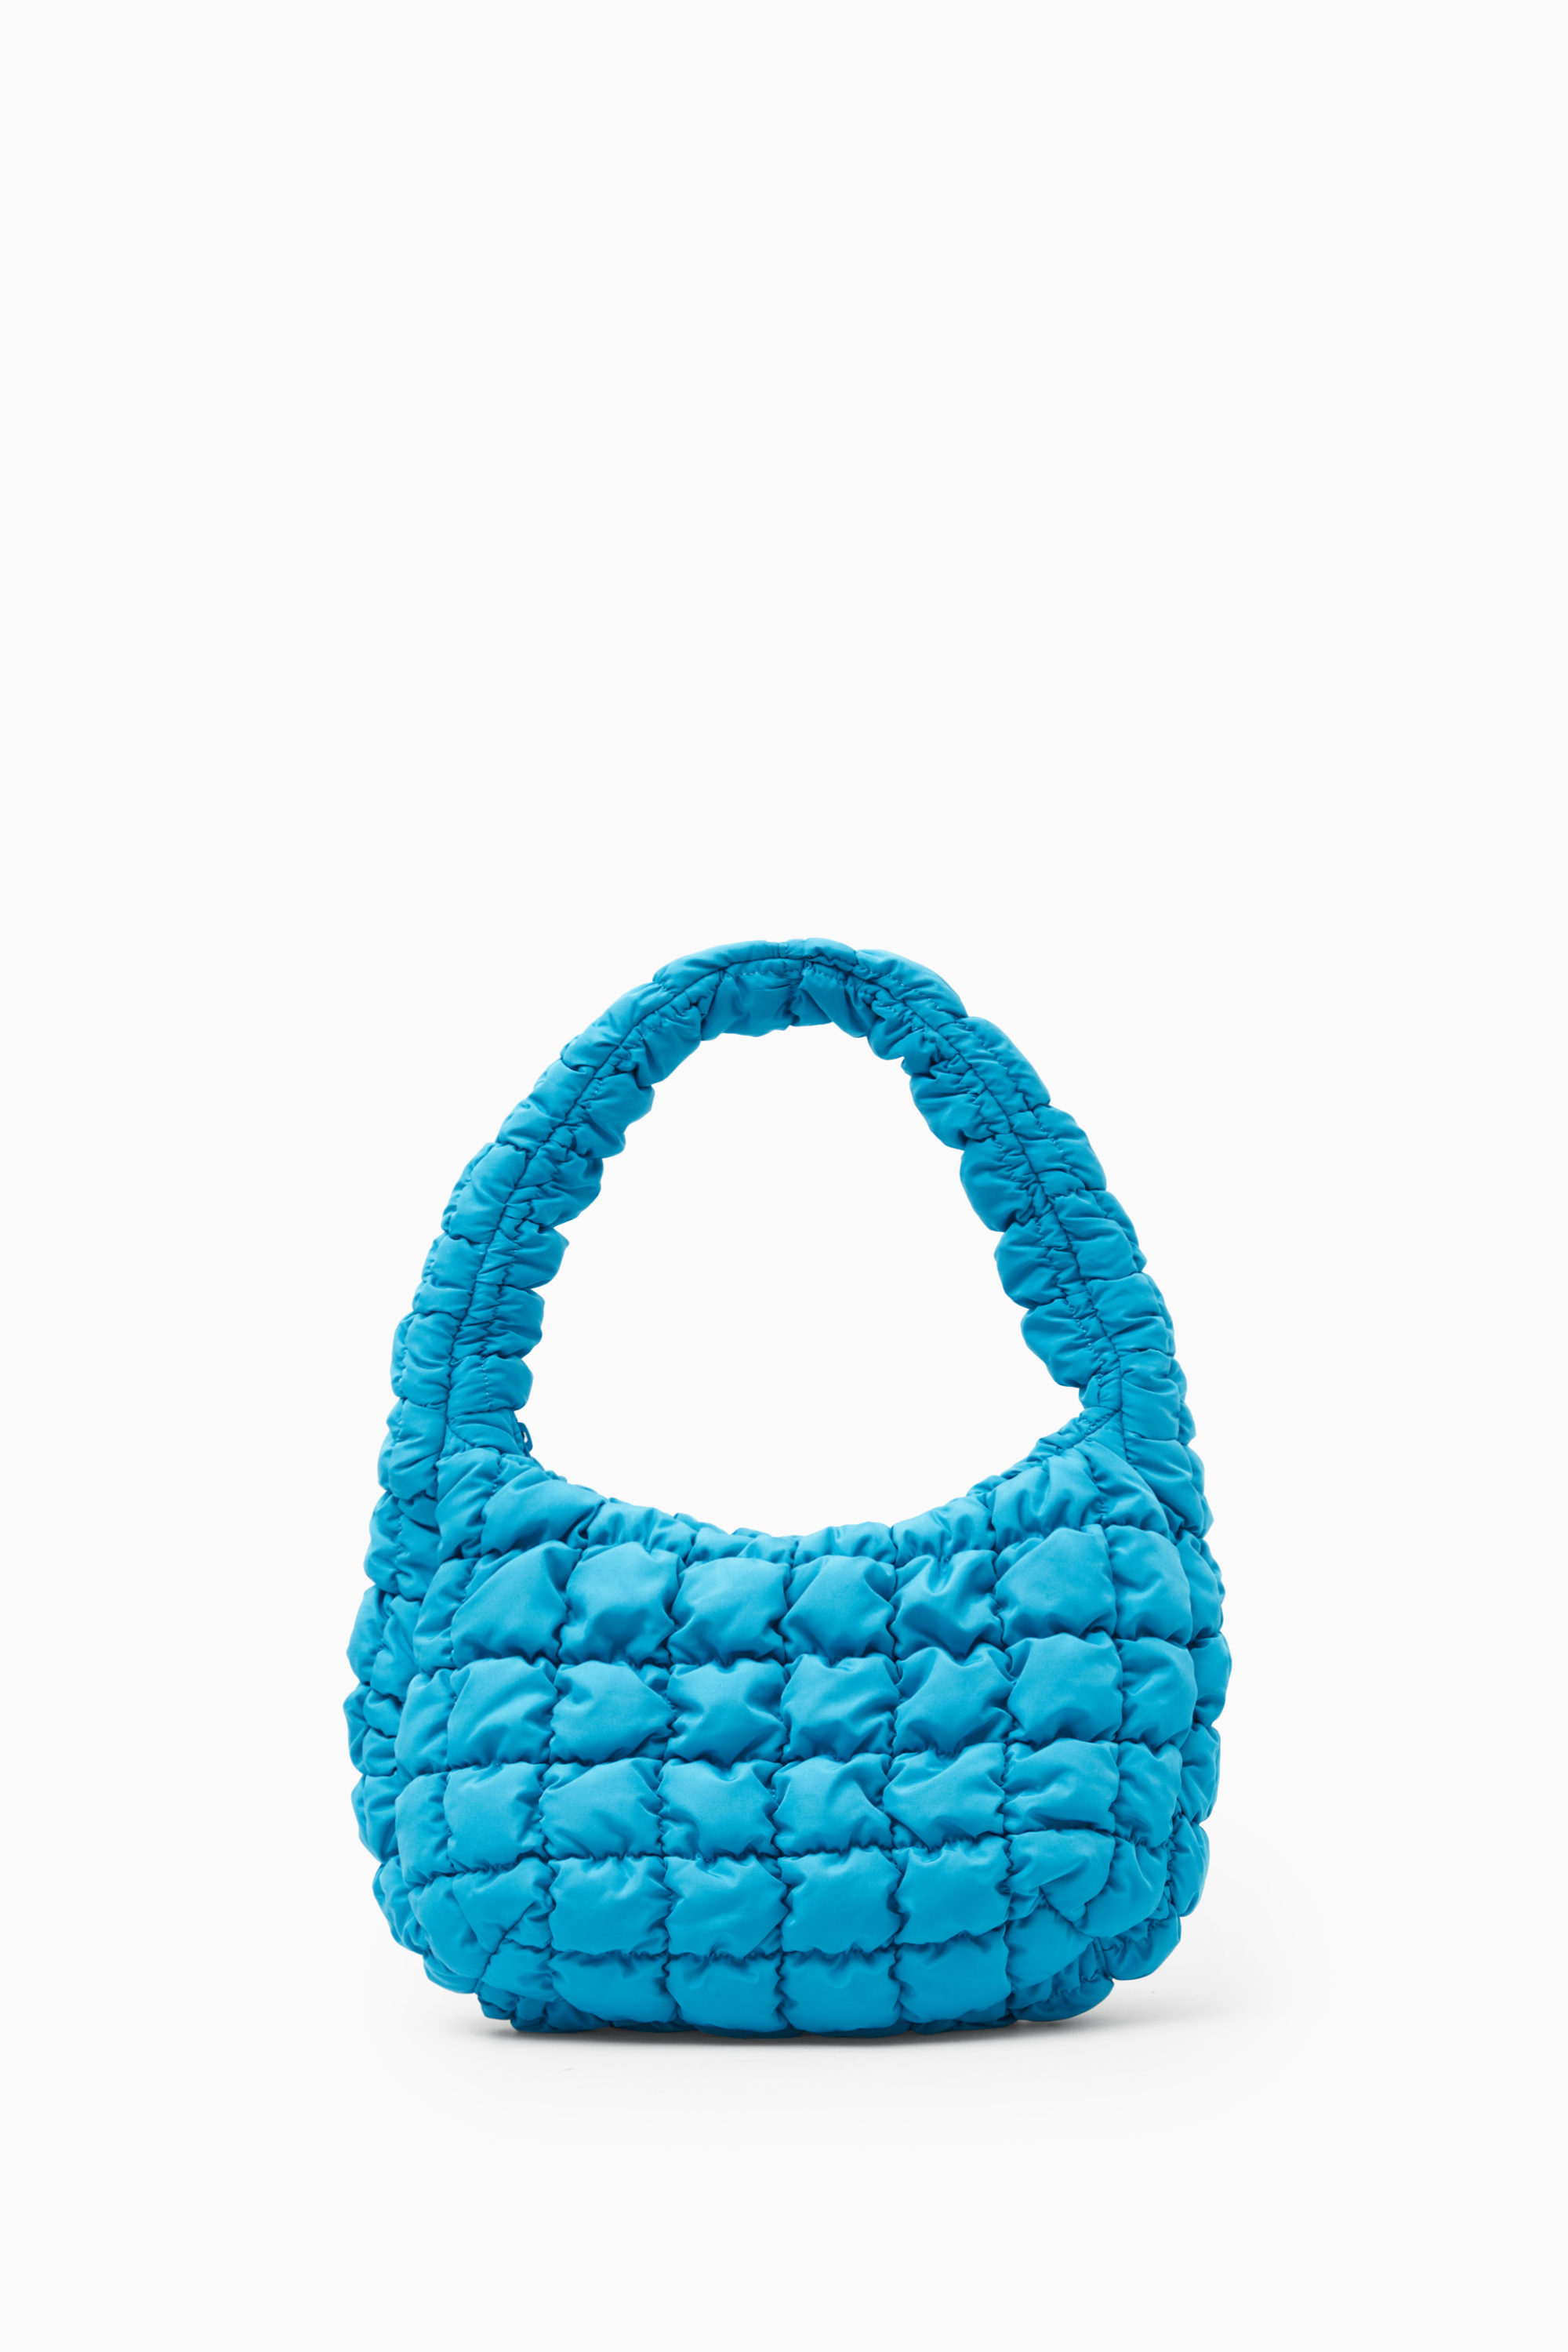 Cos Quilted Bag - Shop on Pinterest